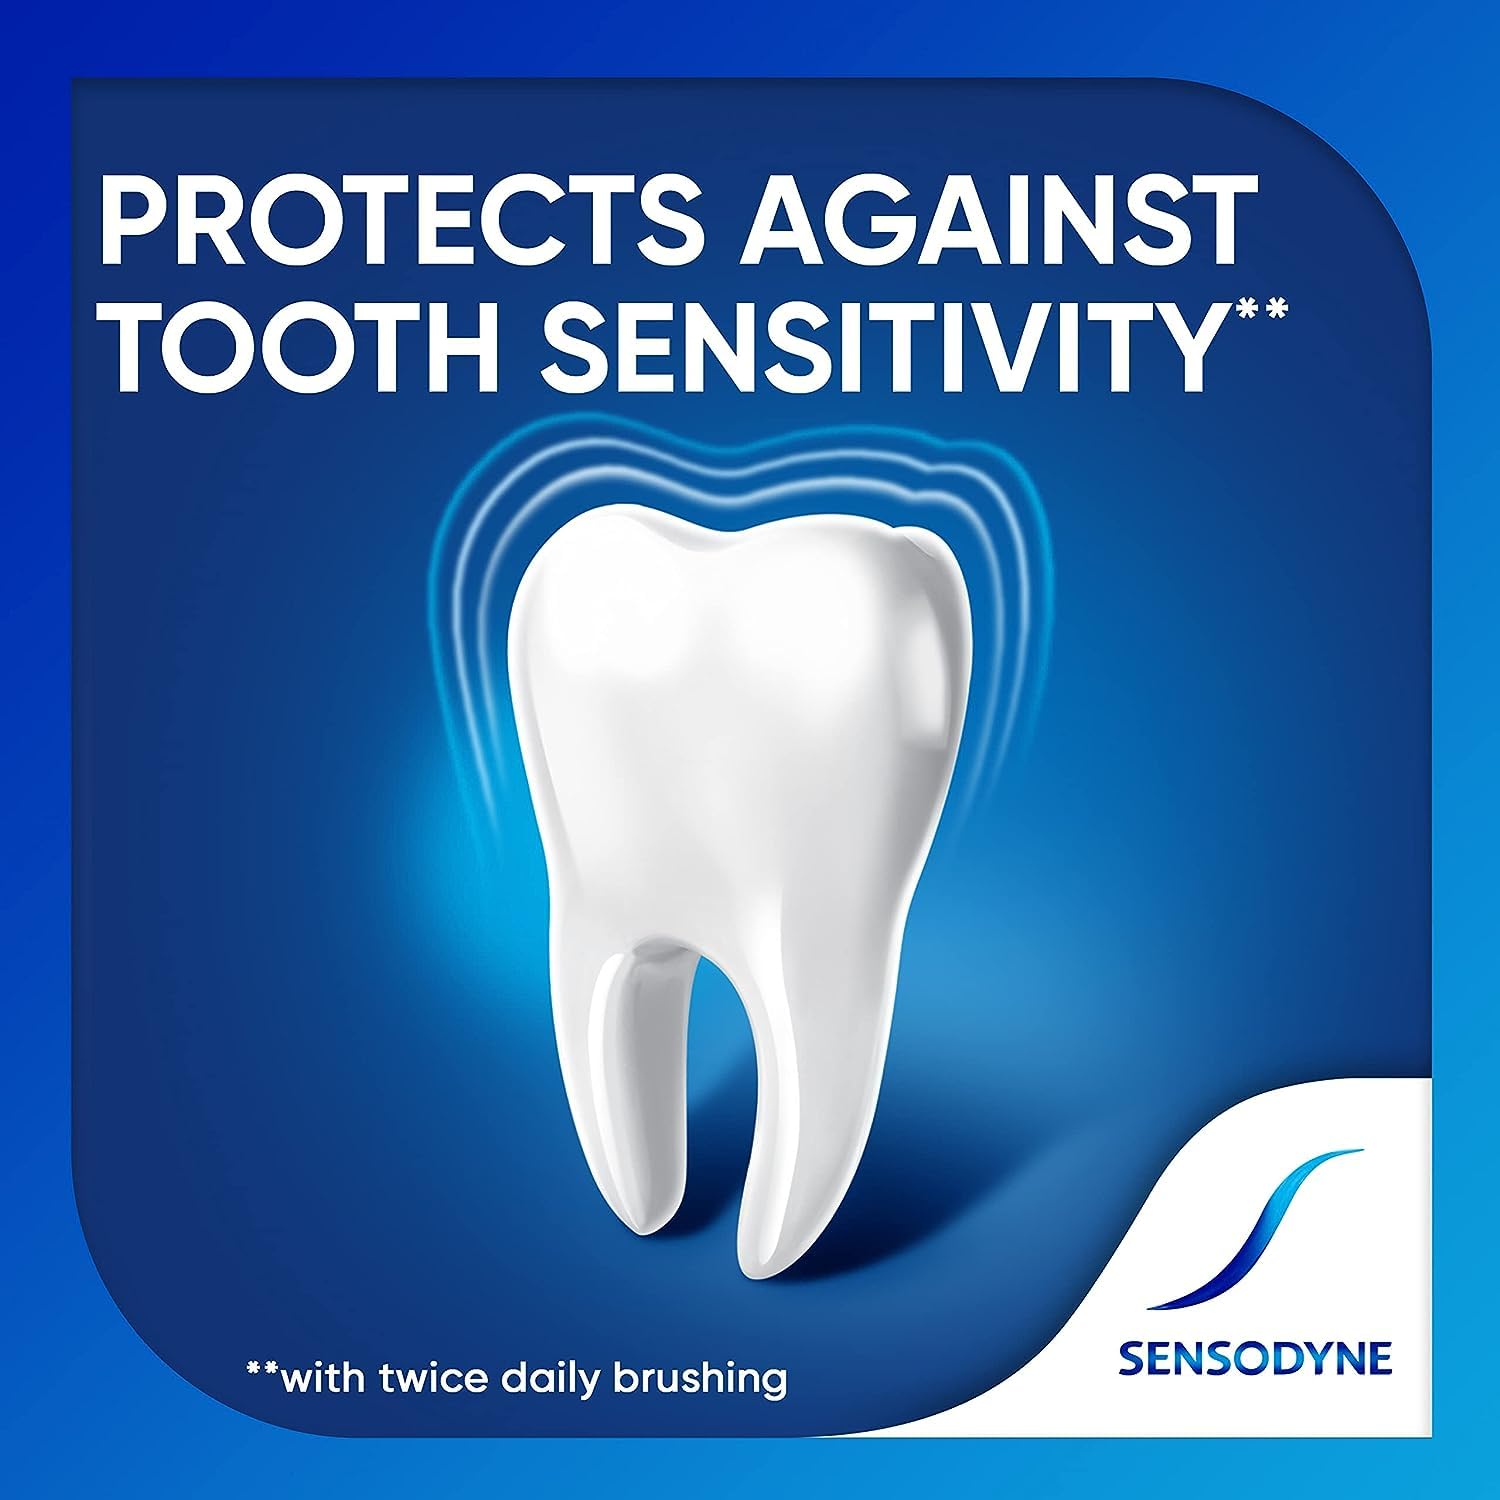 Sensodyne Repair and Protect Mint Toothpaste, Toothpaste for Sensitive Teeth and Cavity Prevention, 3.4 oz (Pack of 3)